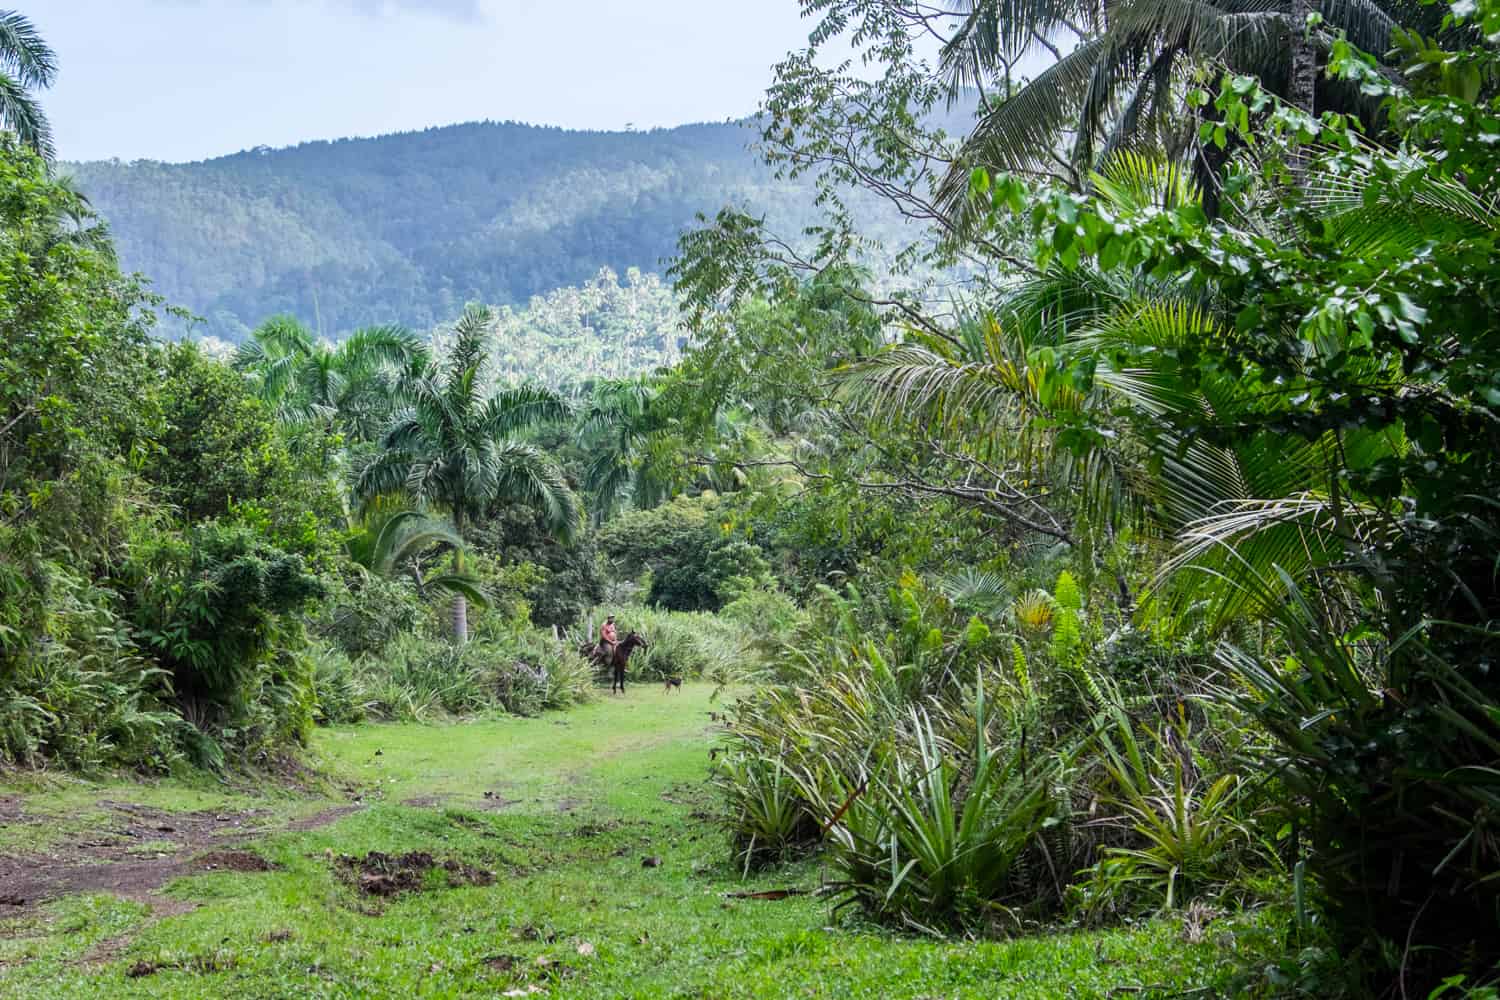 A man on horseback in the forested area of Vinales – the countryside of Cuba.